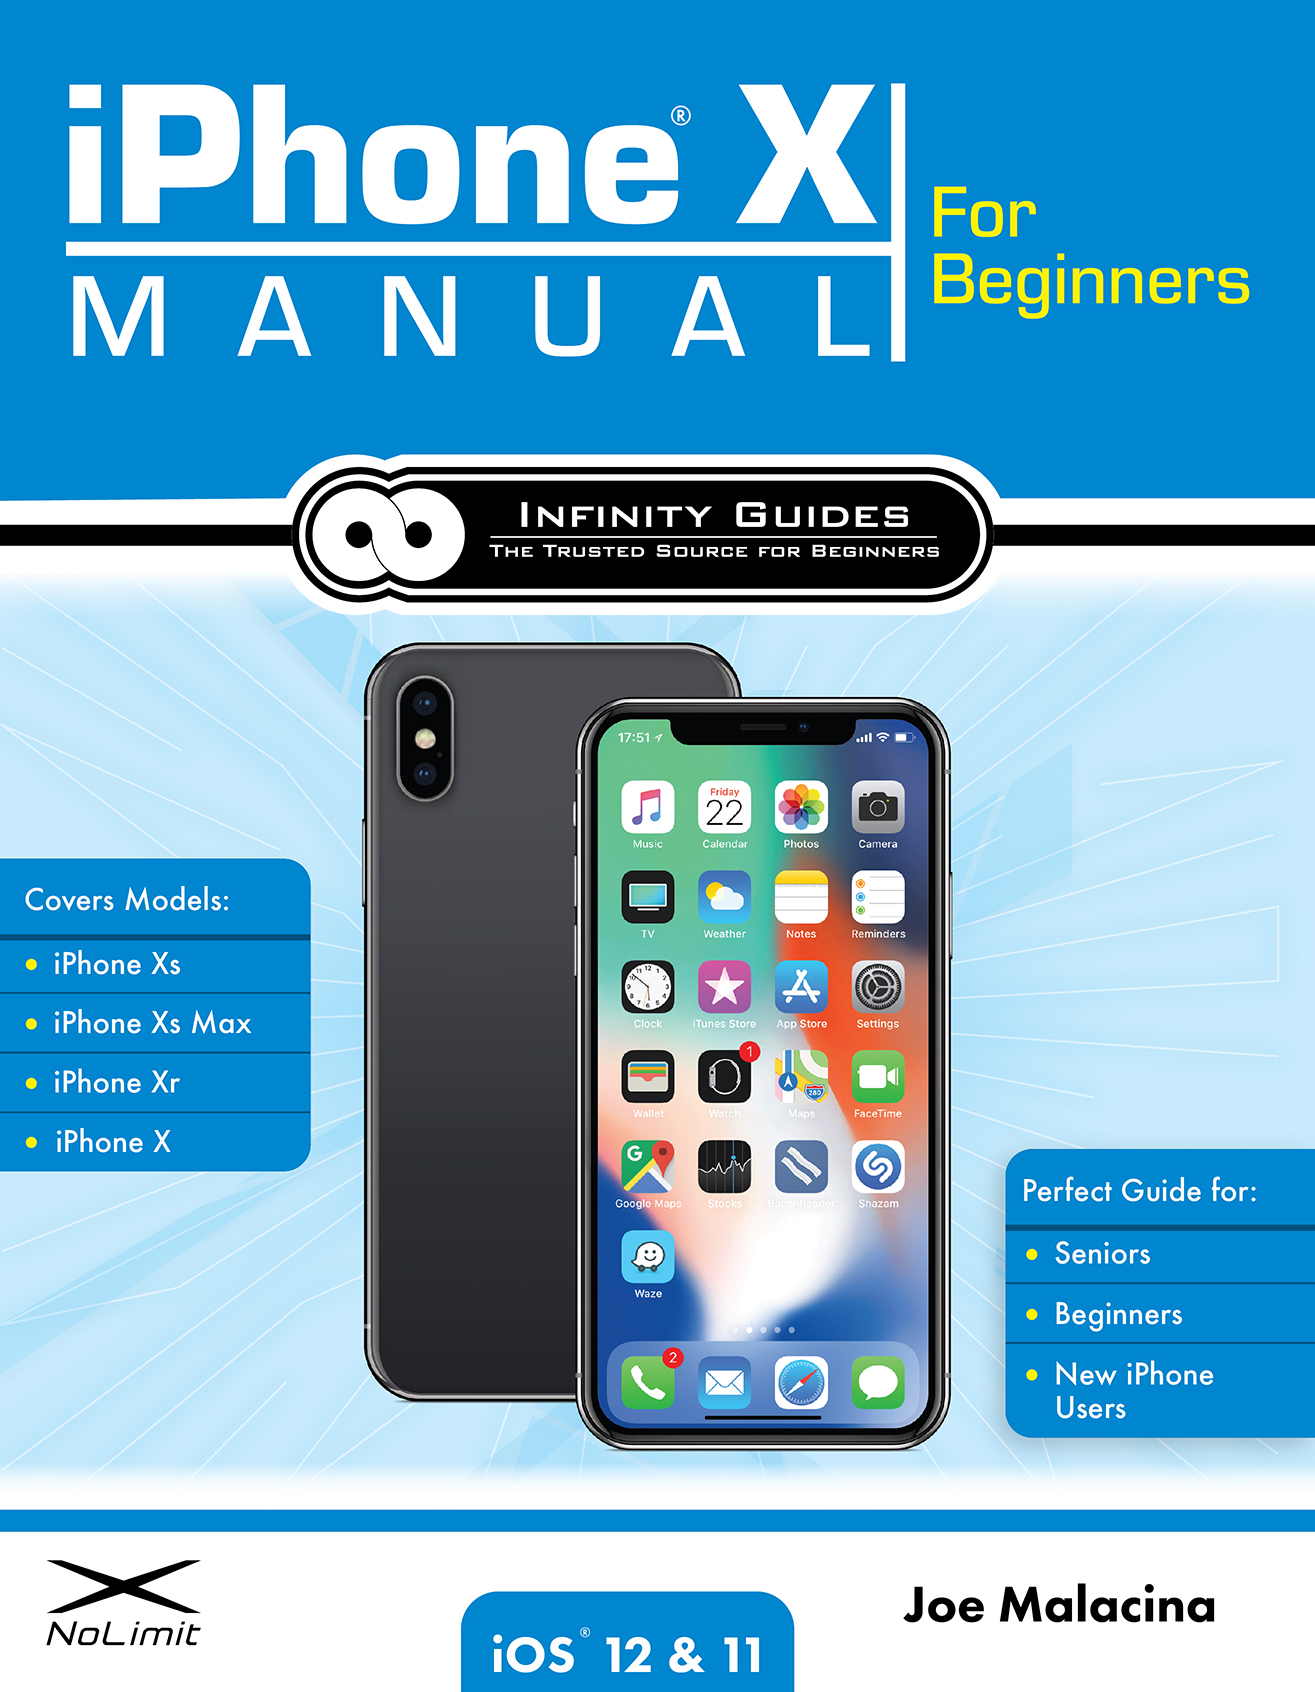 iPhone X Manual for Beginners